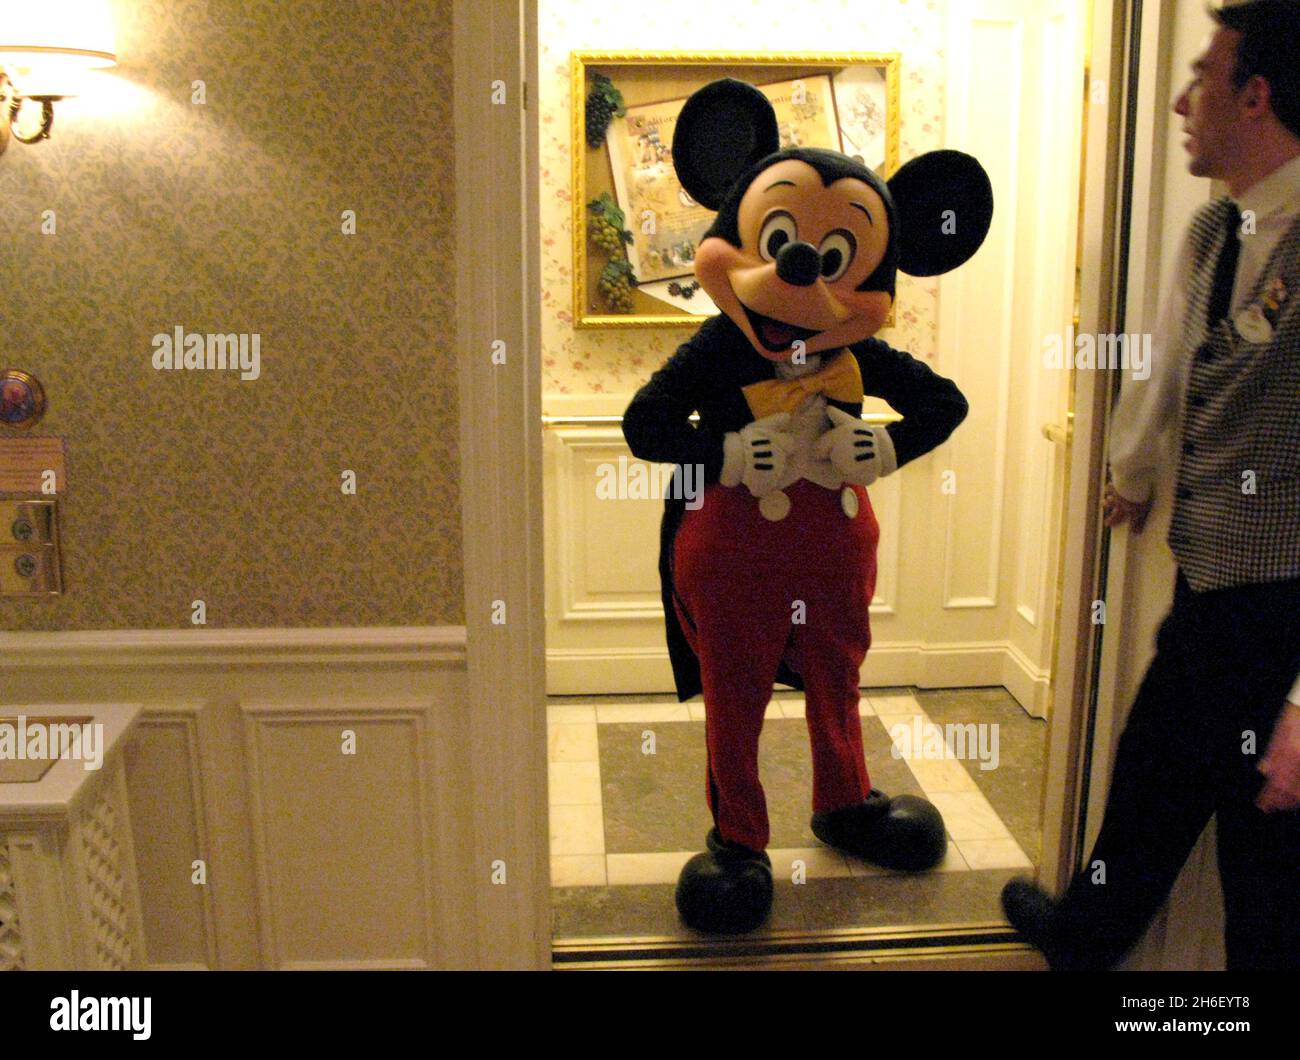 Mickey Mouse gets into the lift at the Disneyland hotel, during the Christmas celebrations at the Disneyland Resort in Paris. Stock Photo